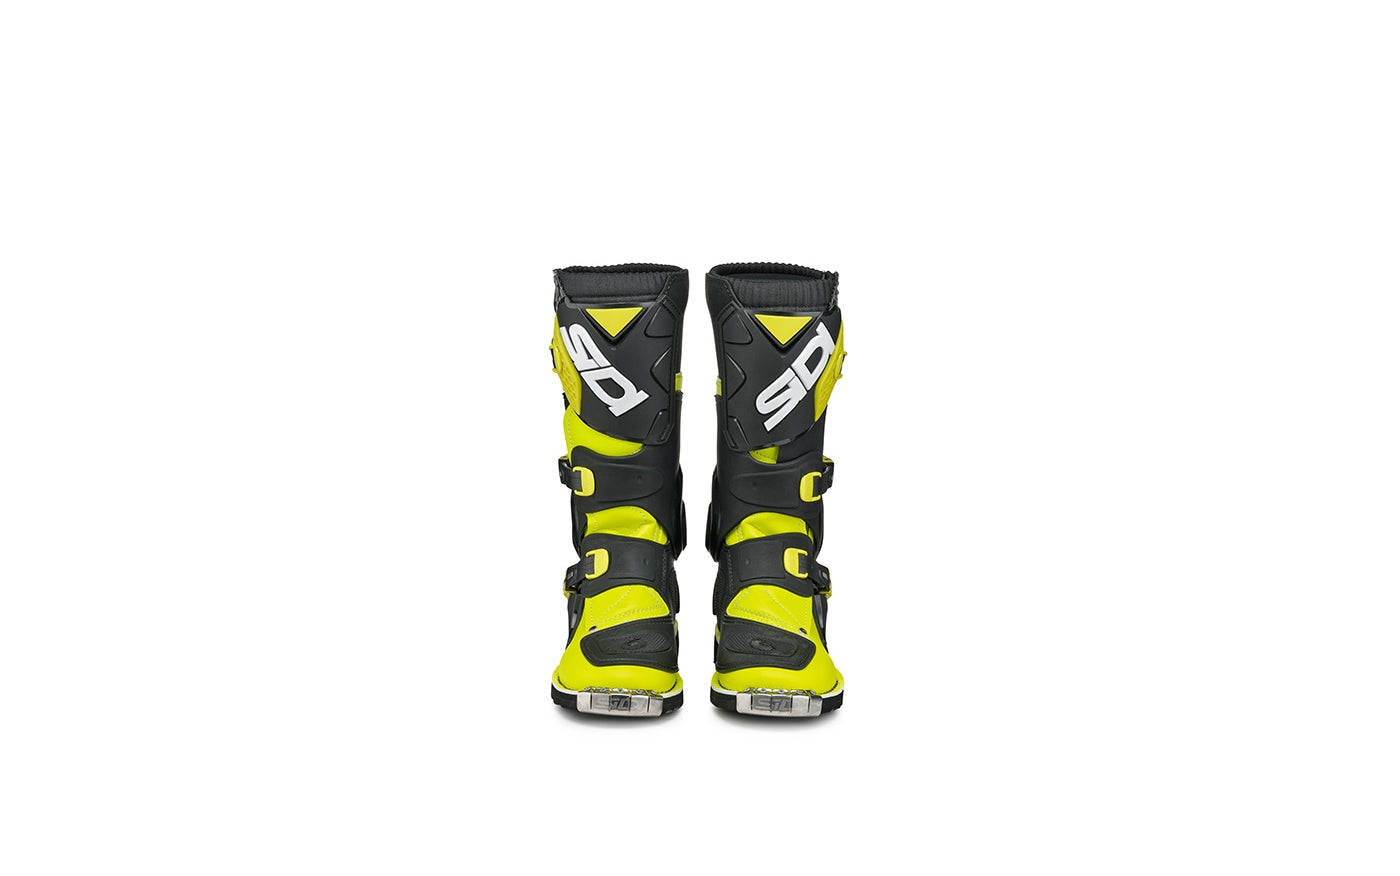 SIDI Flame Yellow/Fluo/Black Boots